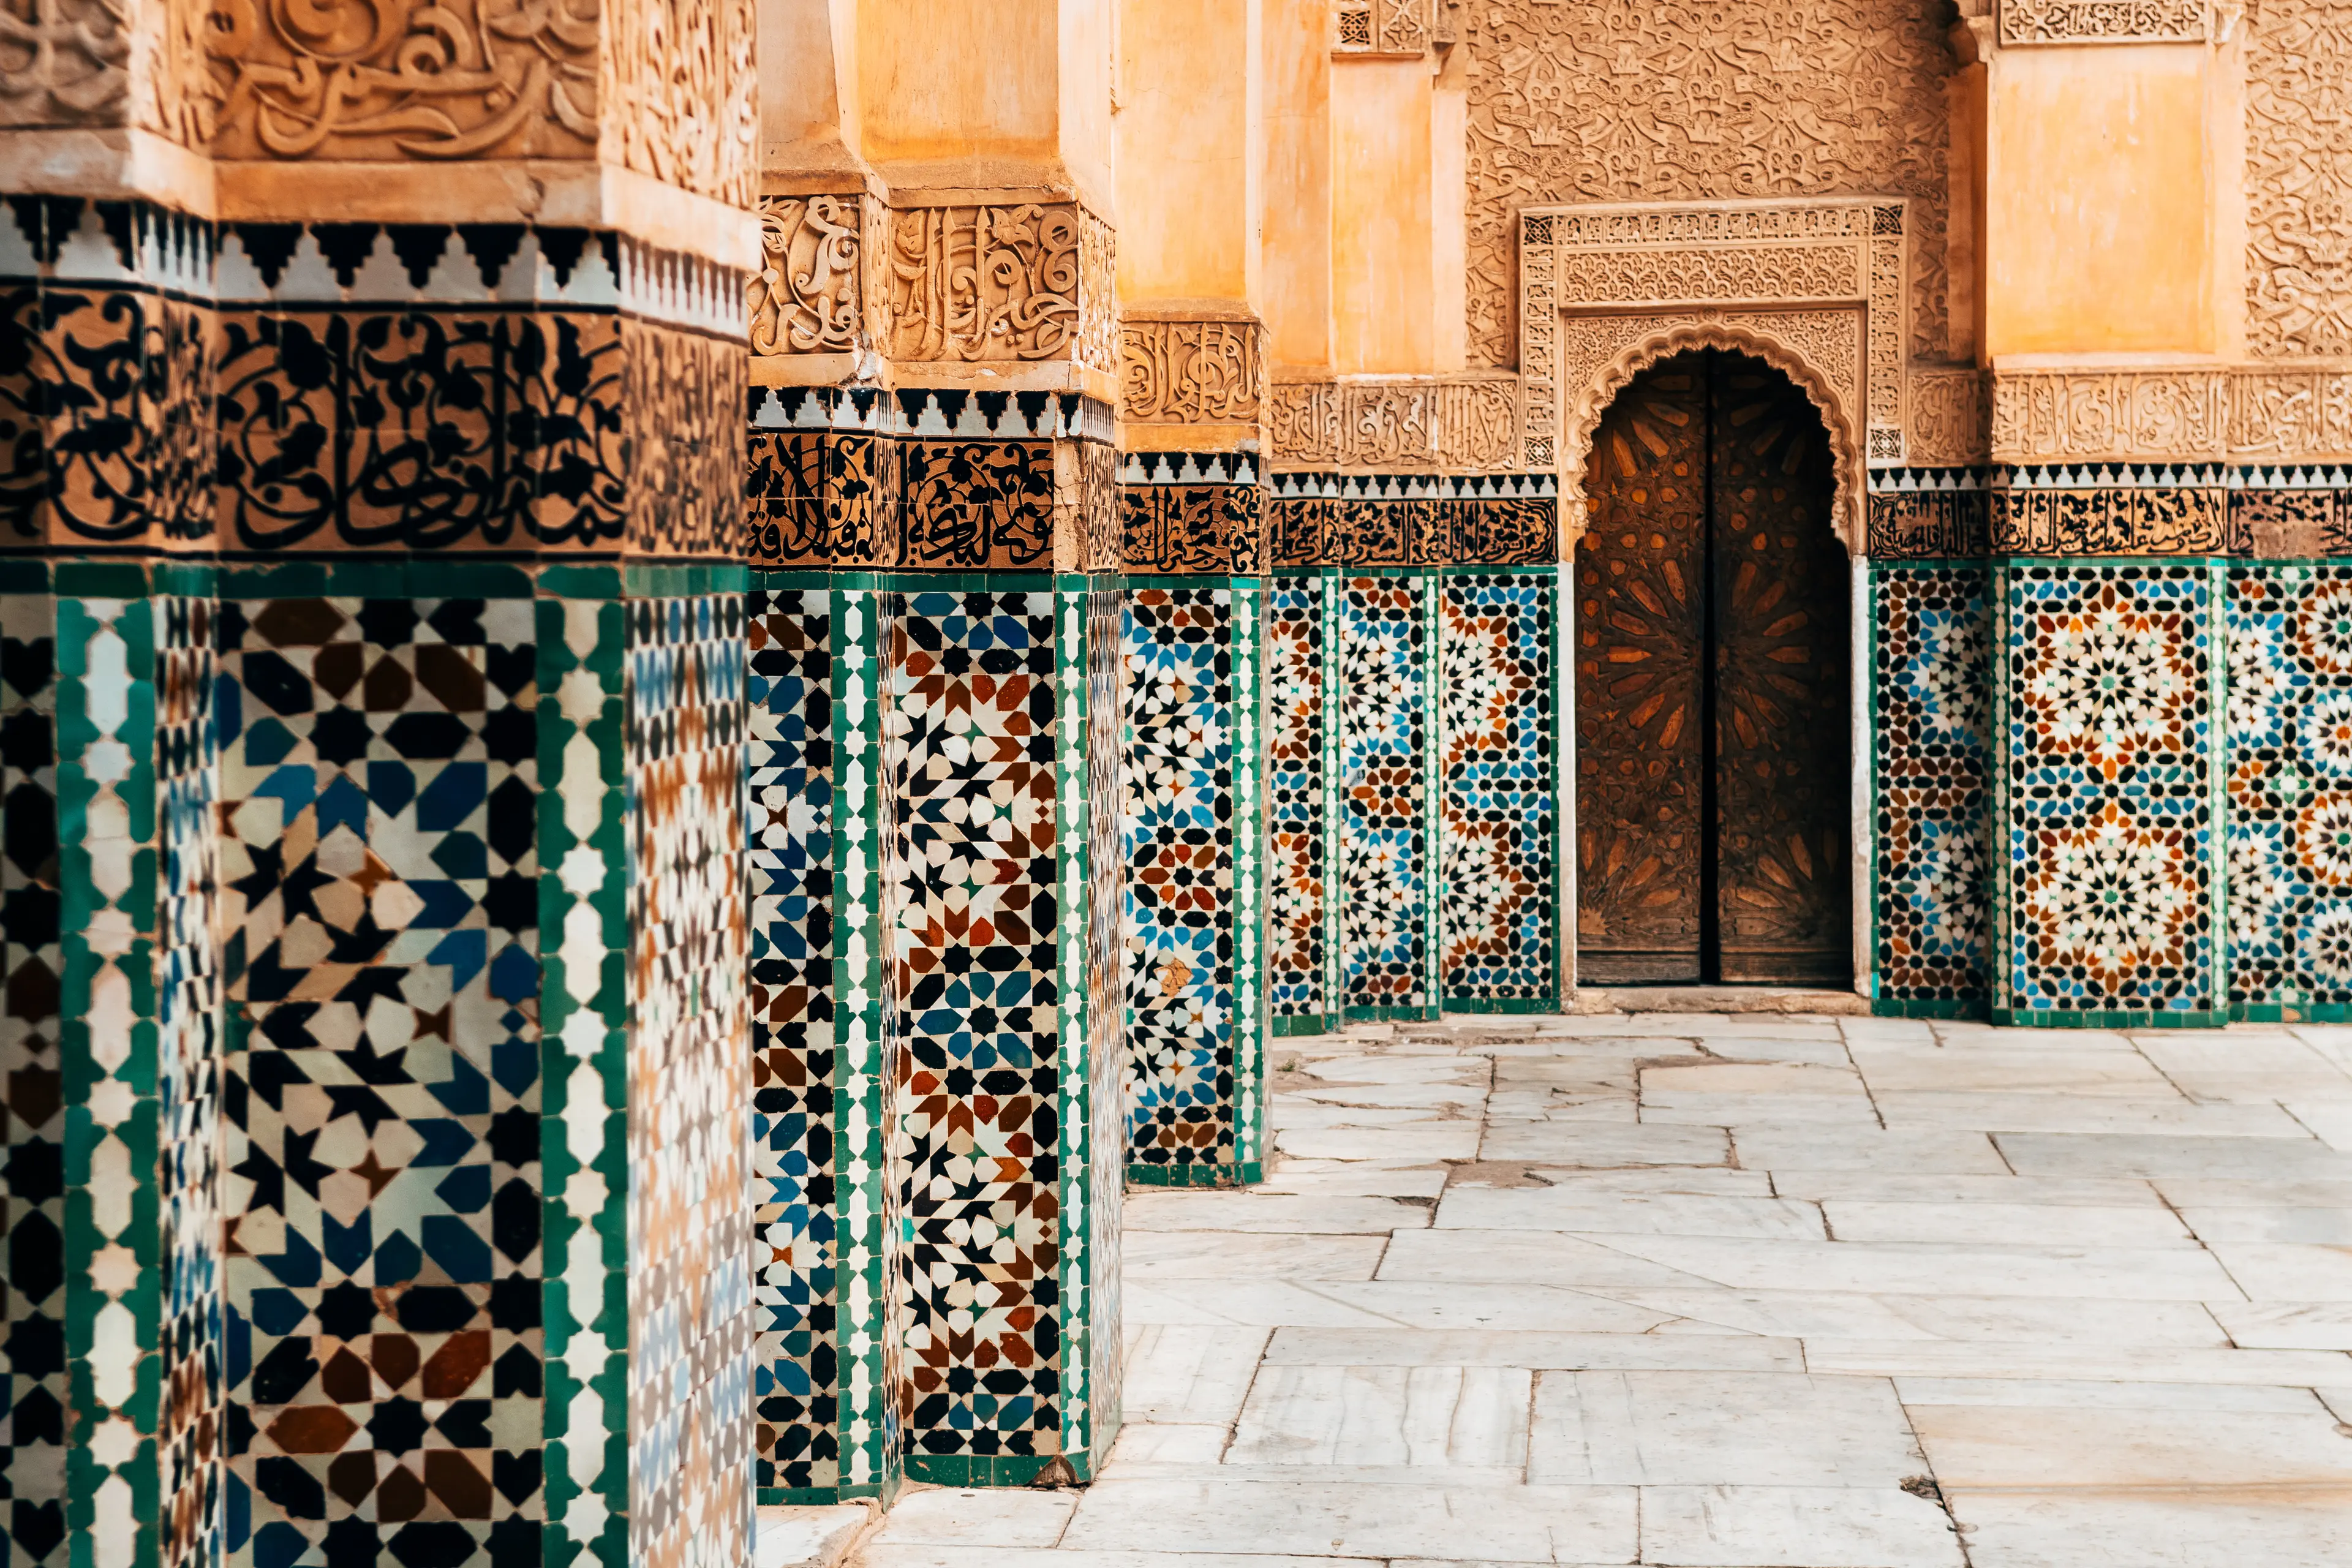 2-Day Exciting Journey through Marrakech, Morocco